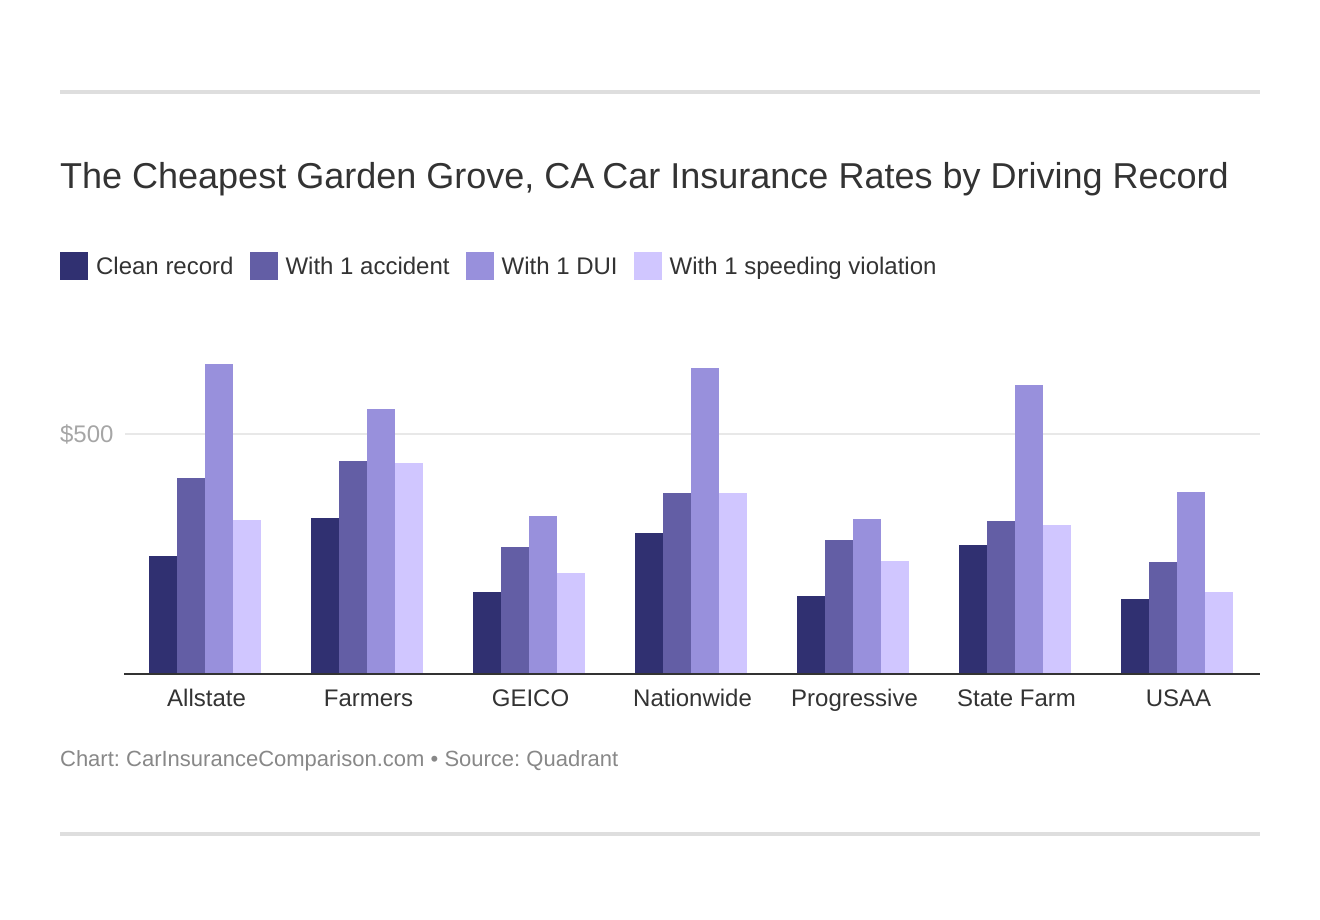 The Cheapest Garden Grove, CA Car Insurance Rates by Driving Record